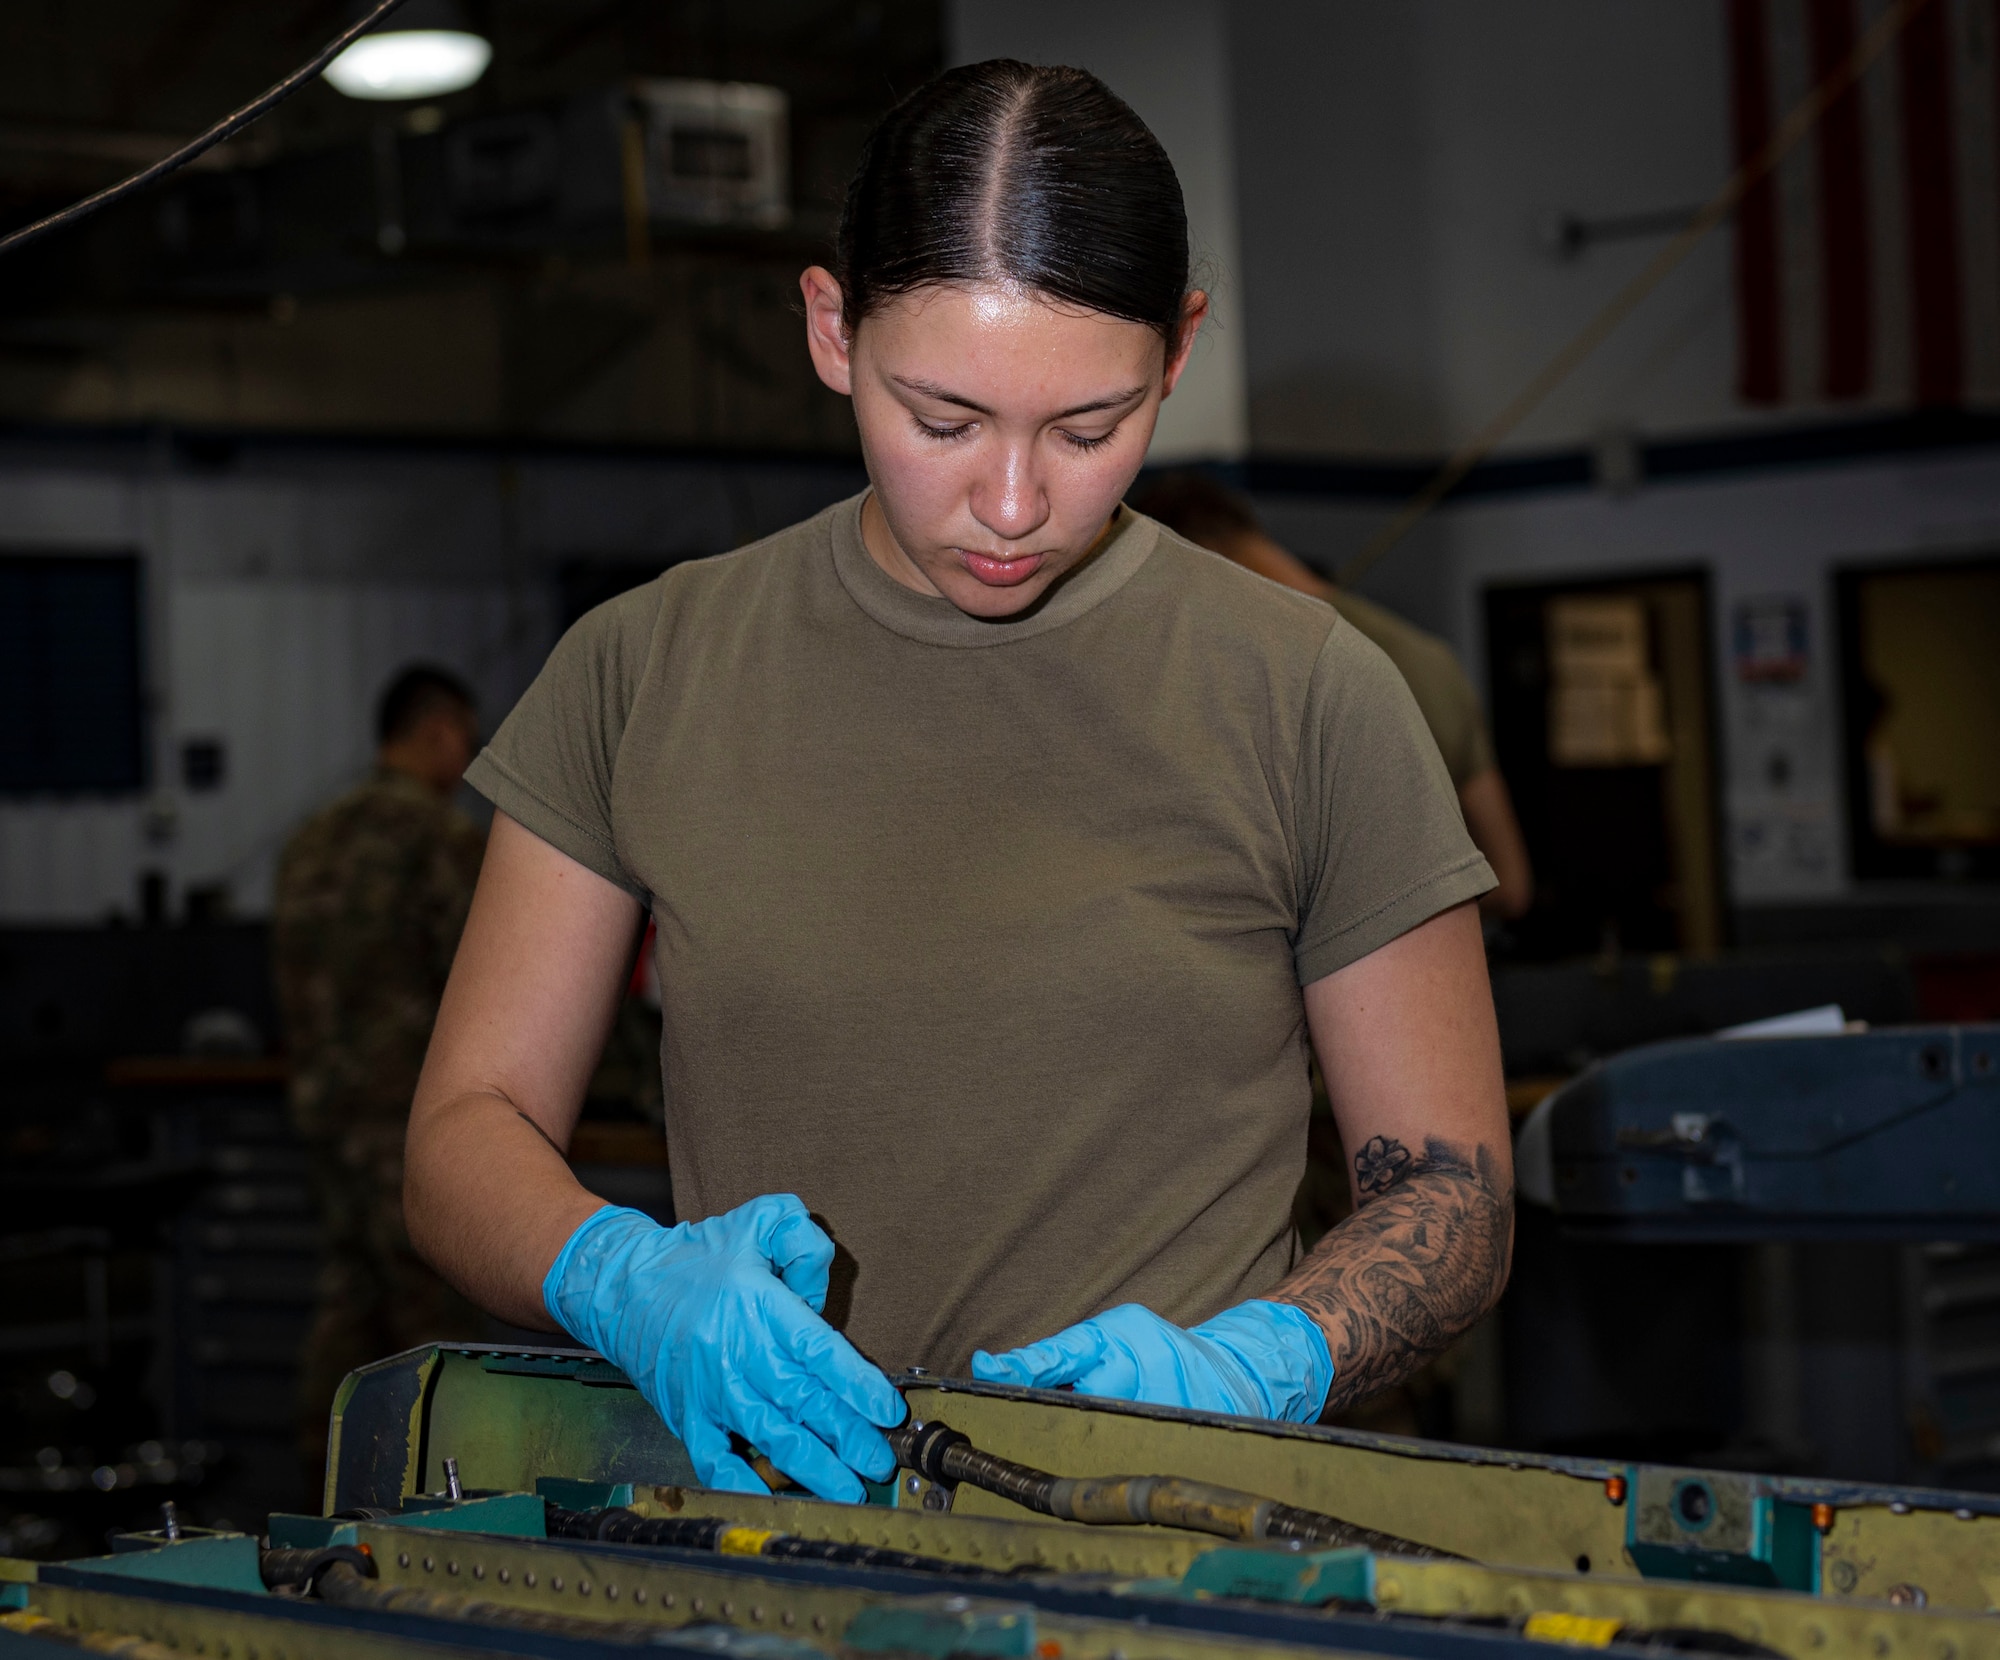 Senior Airman Megan Perkins, 4th Munitions Squadron armament maintenance member, assembles Adapter Unit-552 at Seymour Johnson Air Force base, North Carolina, May 12, 2022. Airmen provide reliable armament to ensure a positive connection between weaponry and the F-15E Strike Eagle aircraft. (U.S. Air Force photo by Airman 1st Class Sabrina Fuller)